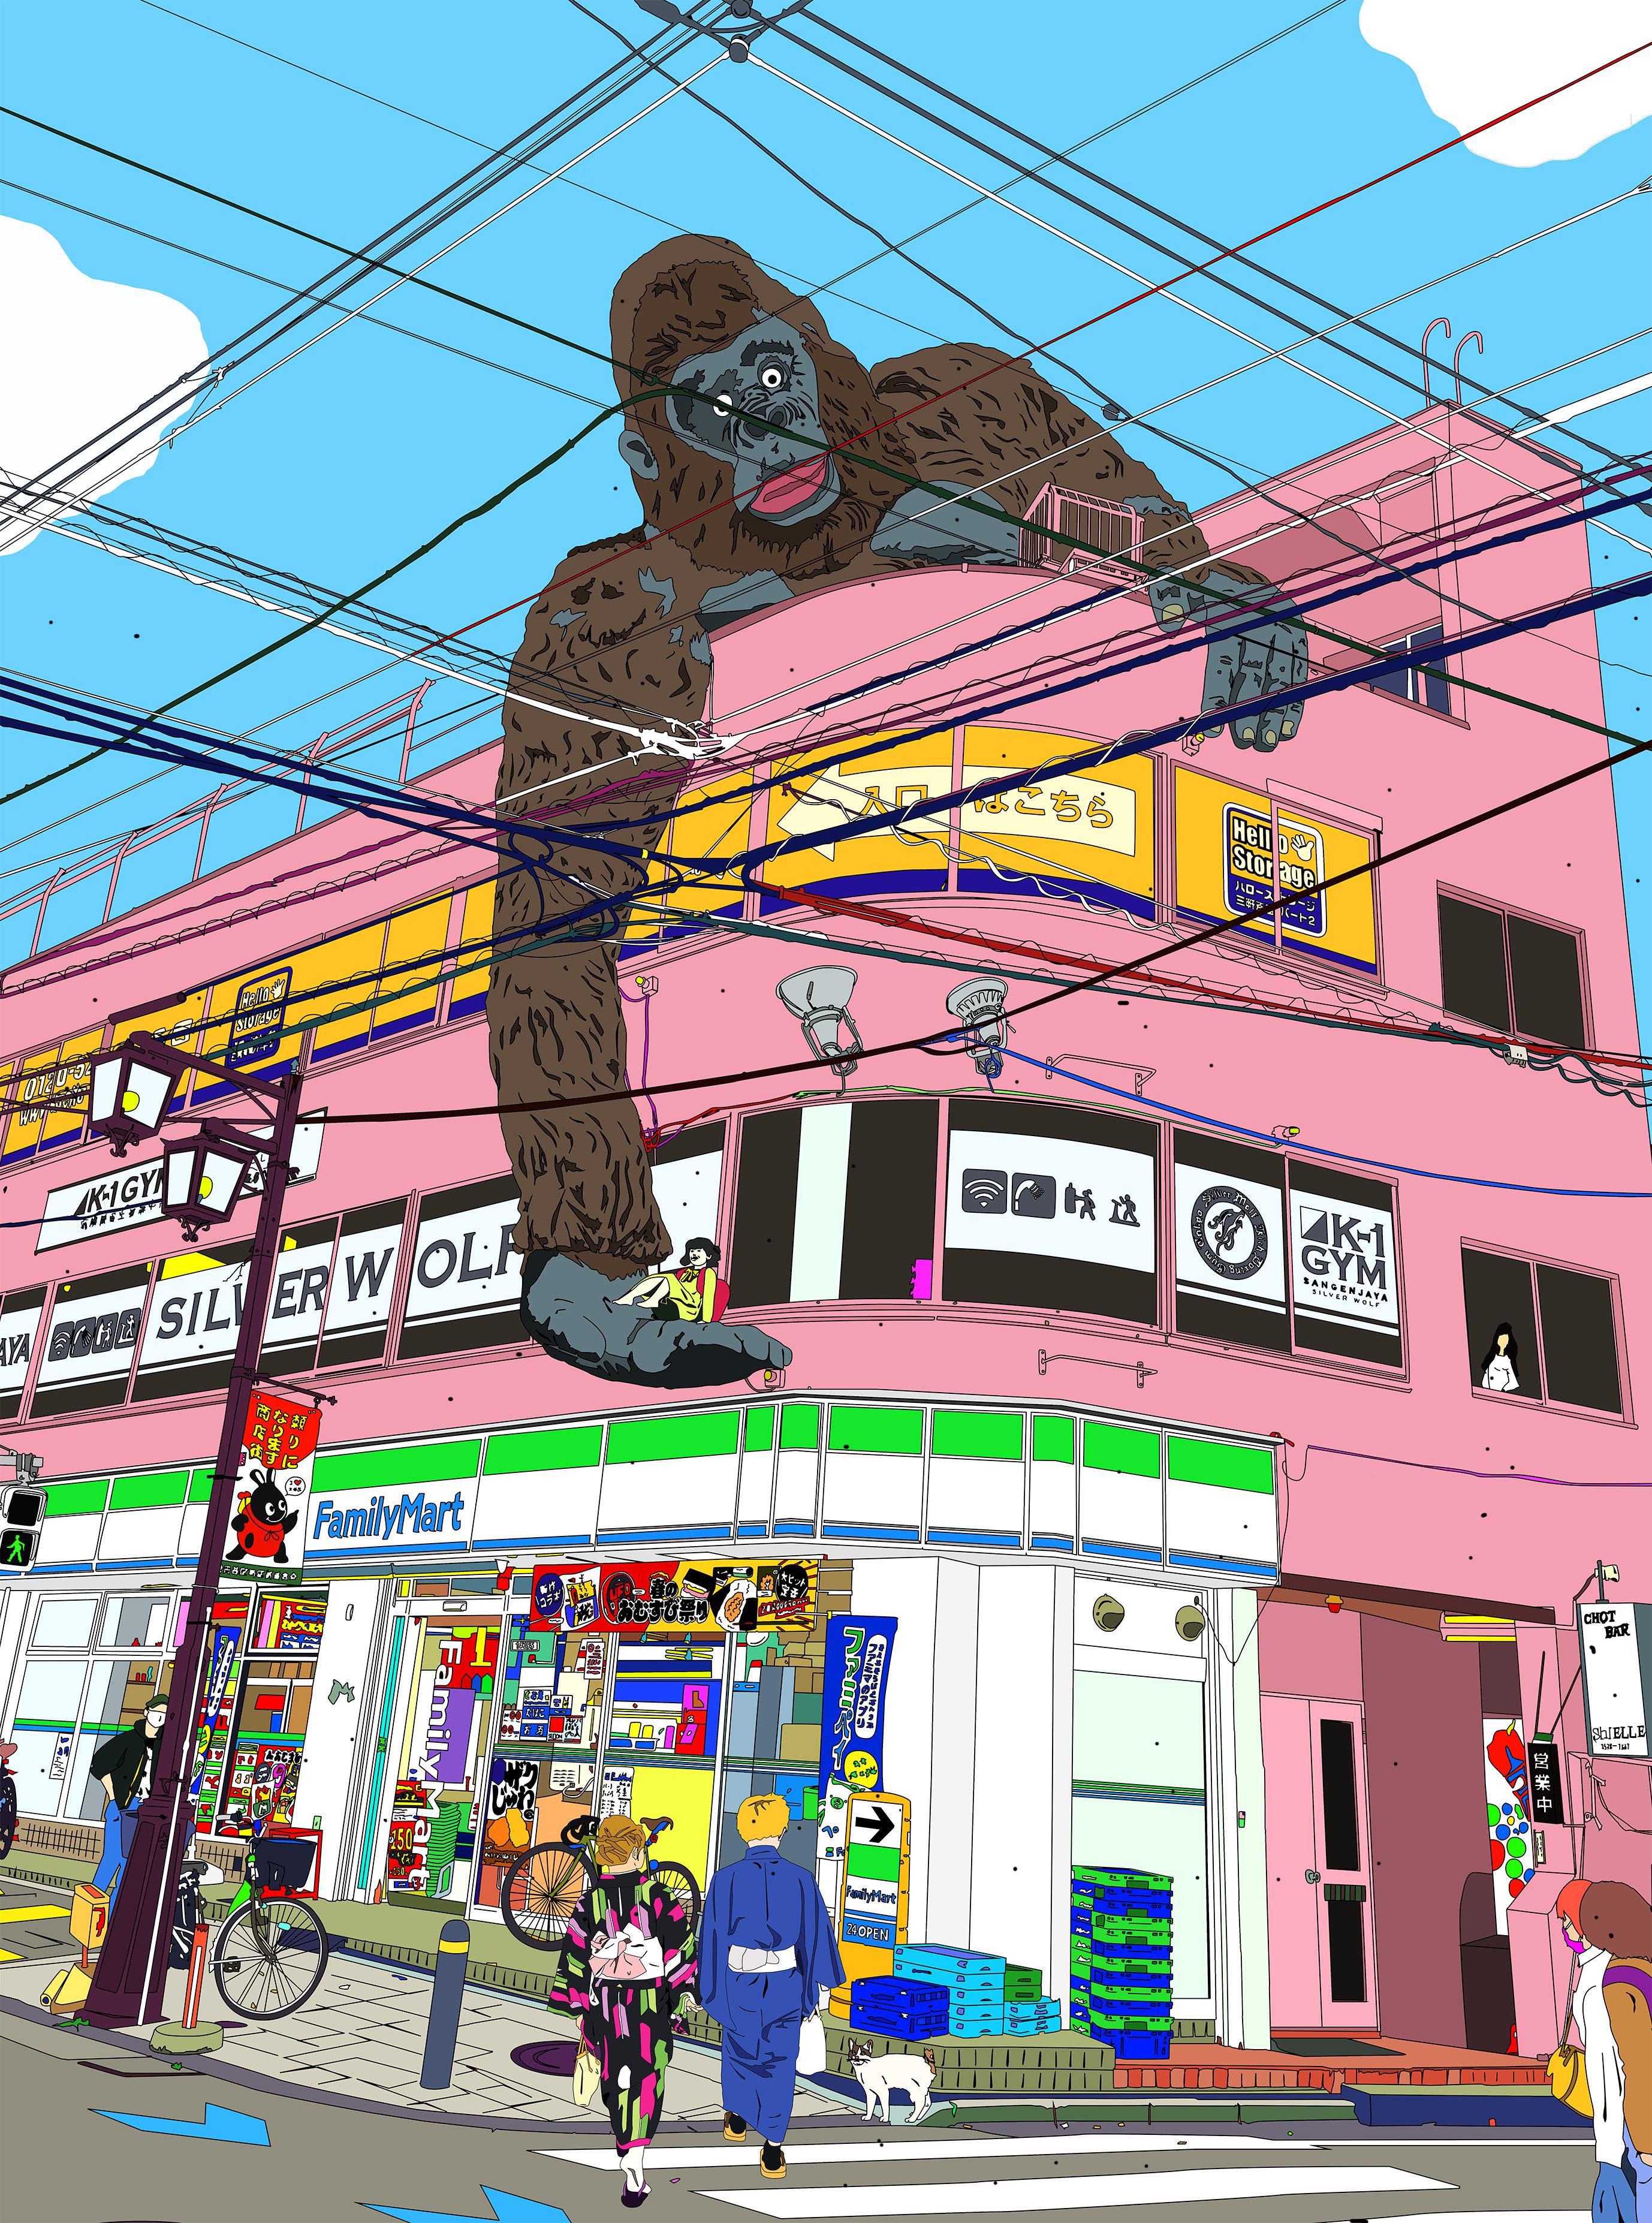 Digital art printed on canvas, original edition 1/1

''It's easy to meet unusual things around Tokyo, this small building in Sangenjaya is definitely one of my Favourite. King Kong looks quiet at least!''

Marco Santaniello is an Italian artist born